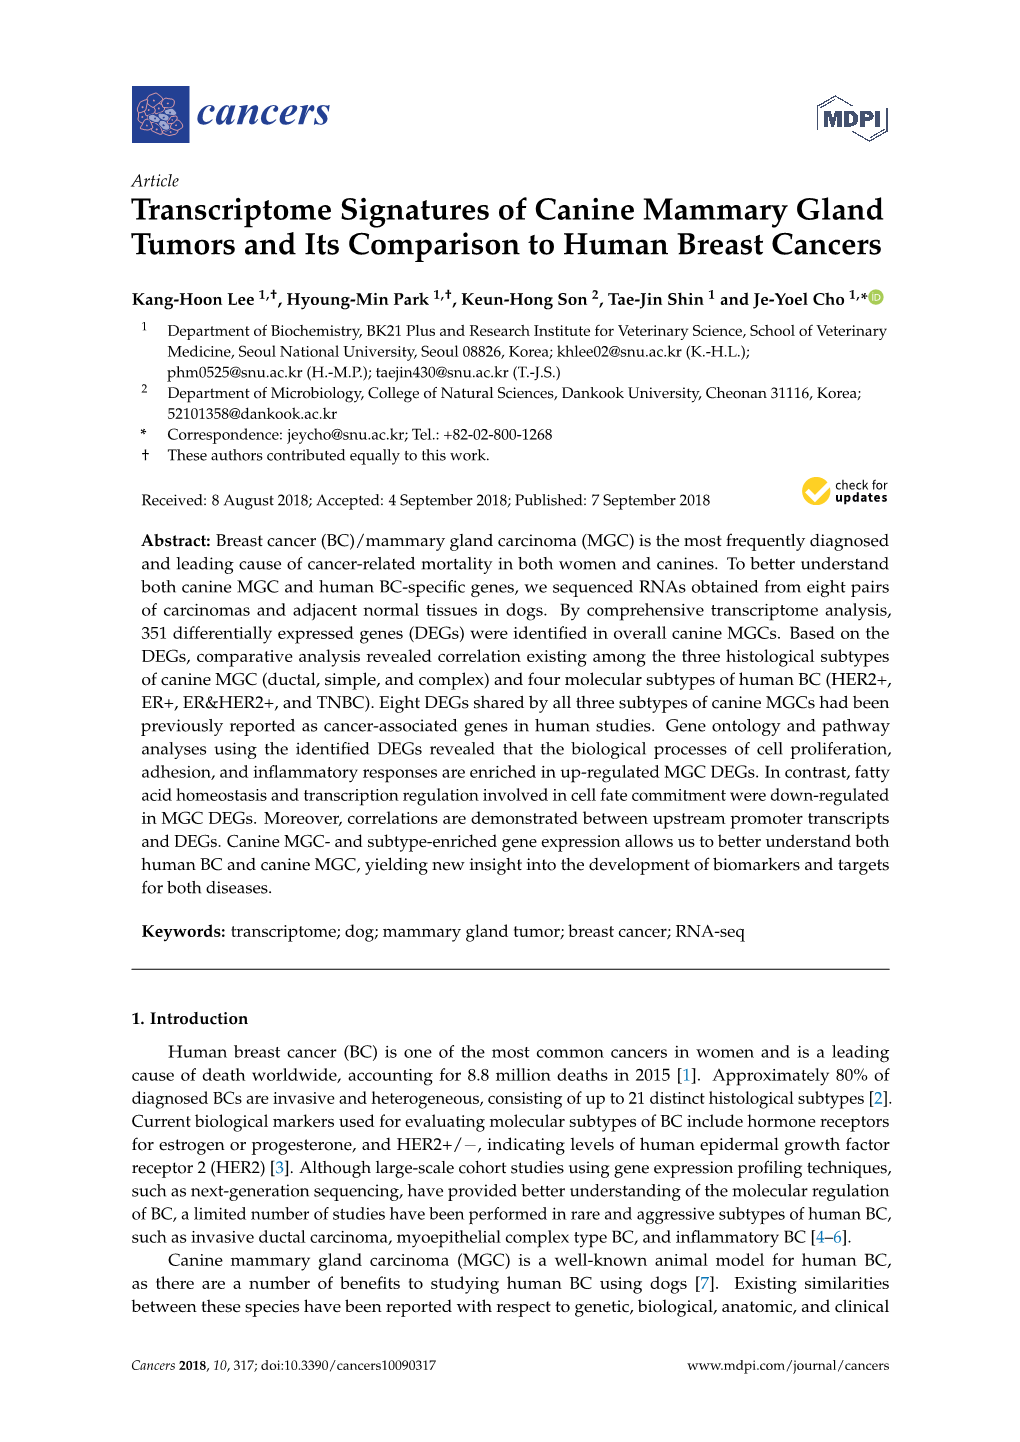 Transcriptome Signatures of Canine Mammary Gland Tumors and Its Comparison to Human Breast Cancers